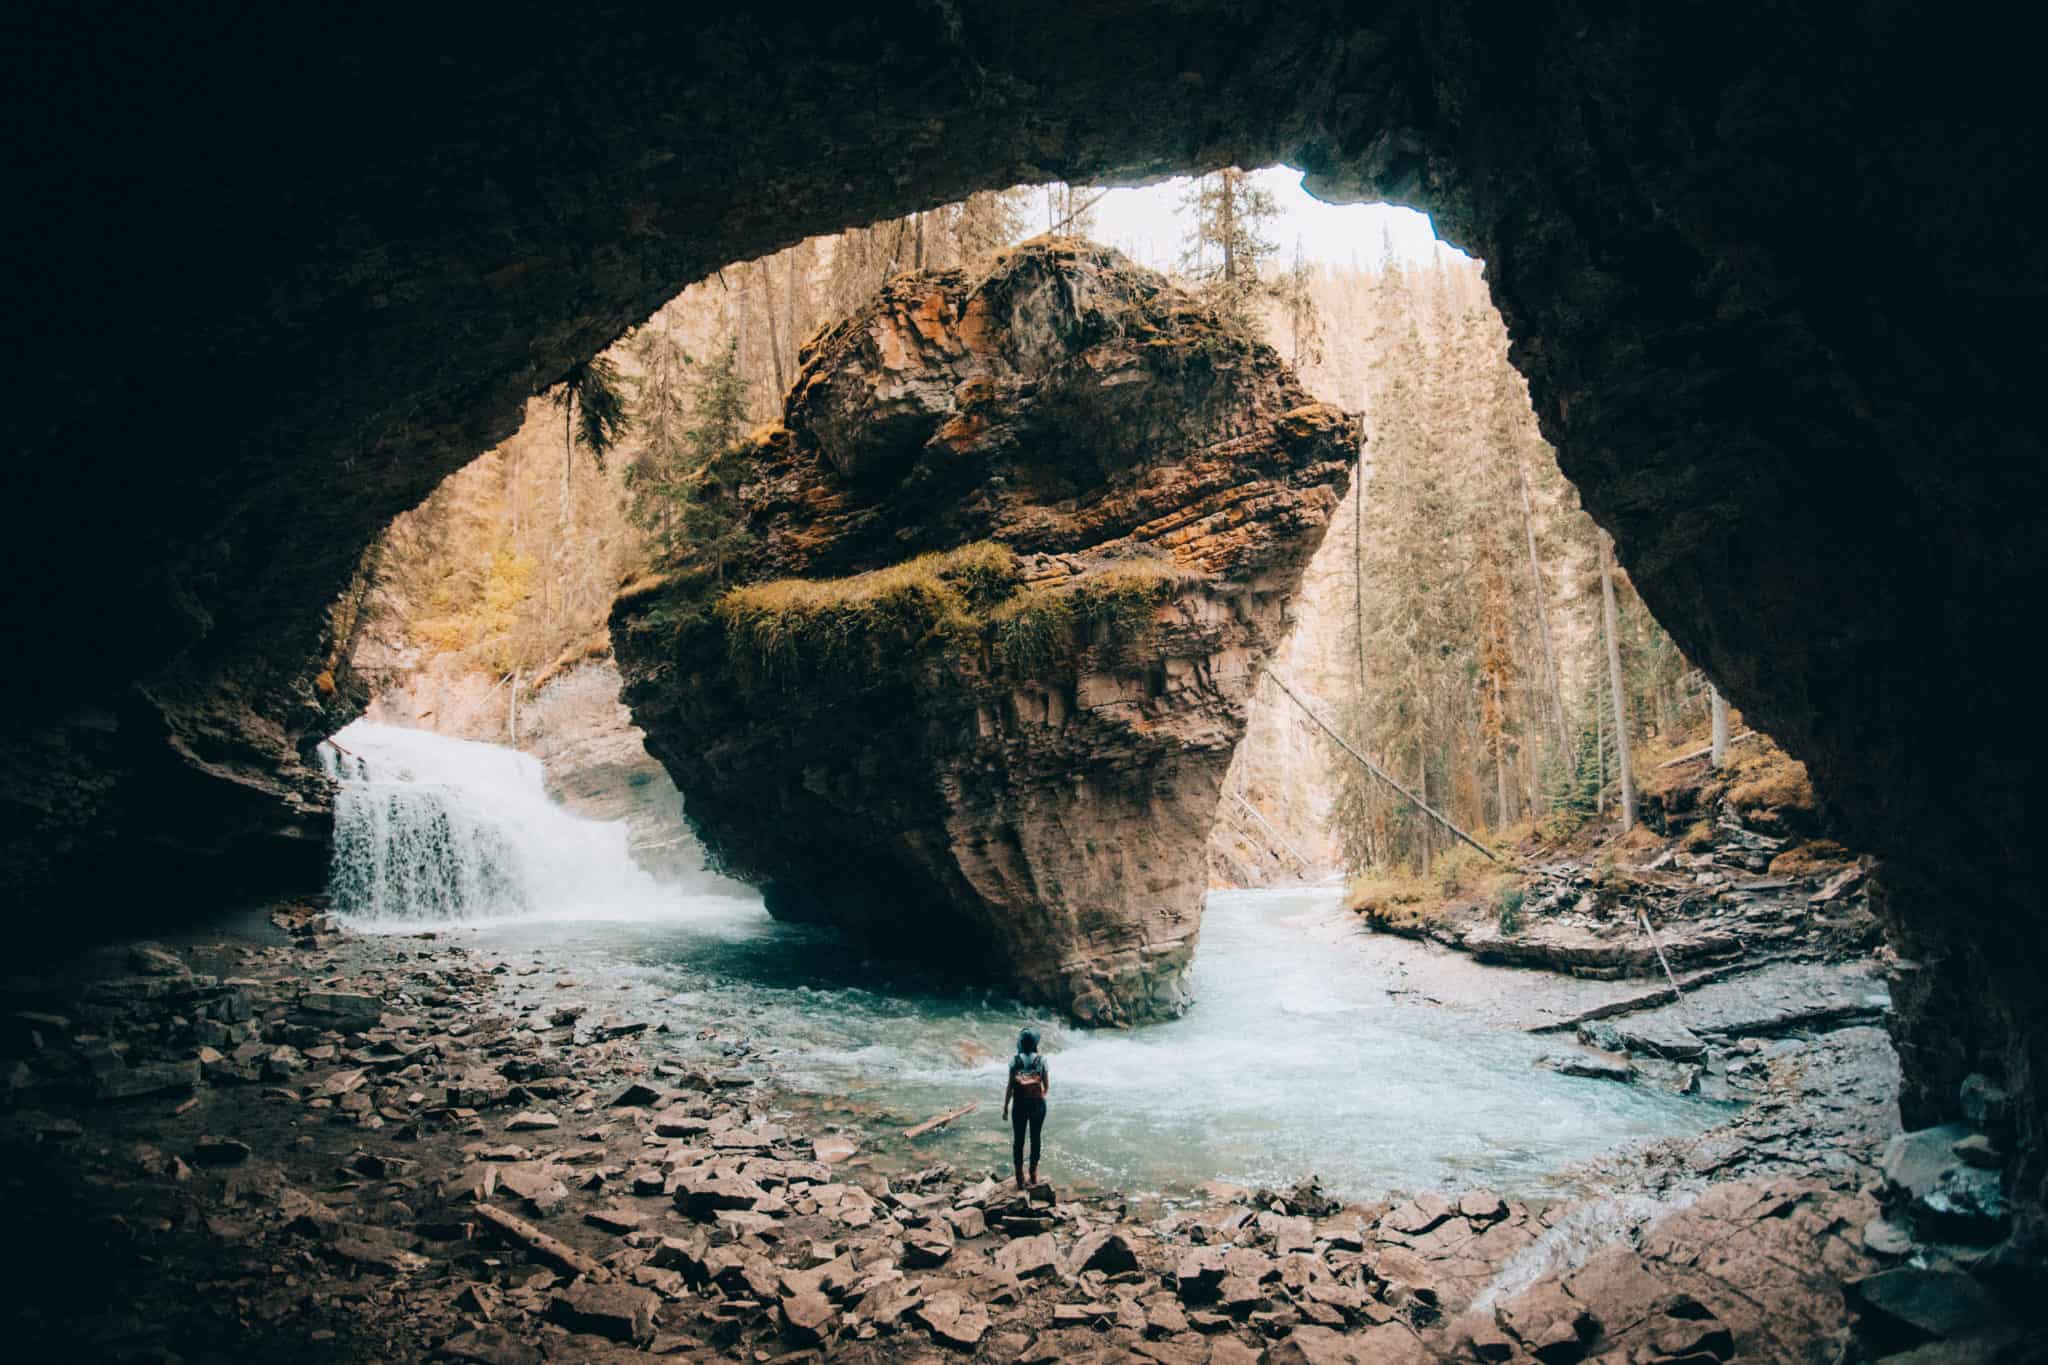 The Most Epic Photo Spots In Banff National Park - Johnston Cave